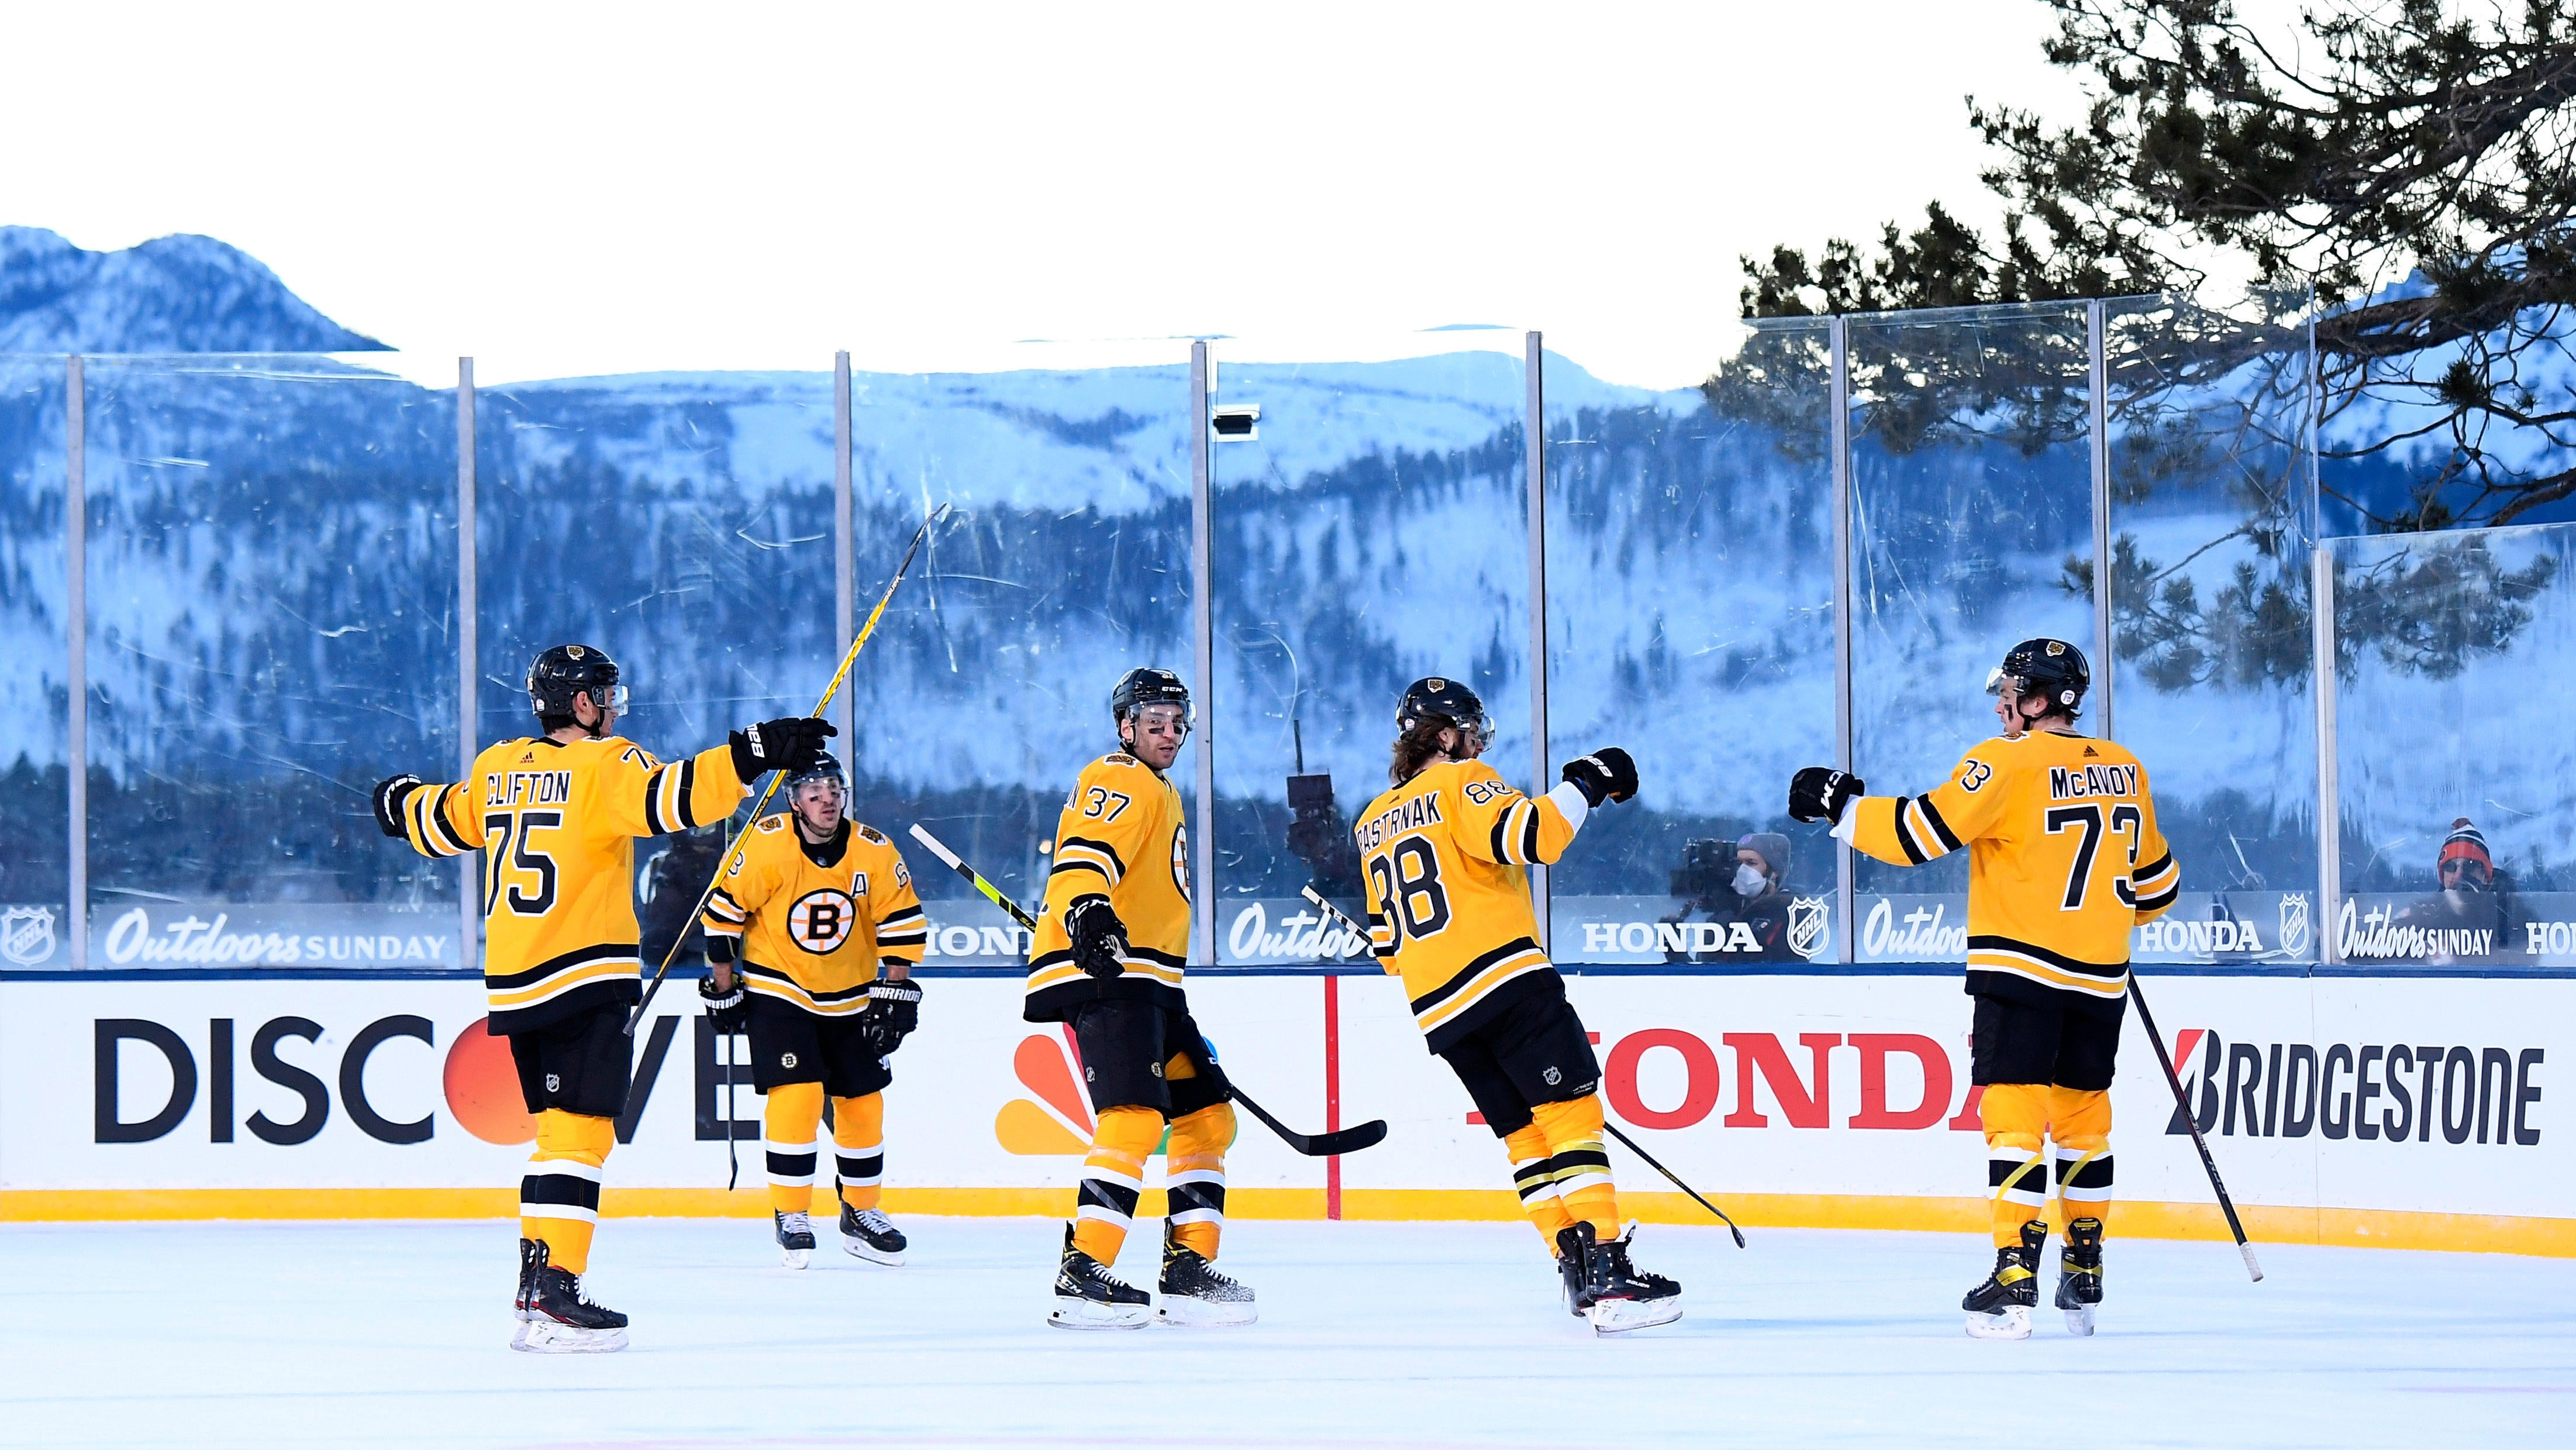 Bruins return home from their 7-3 win at Lake Tahoe.